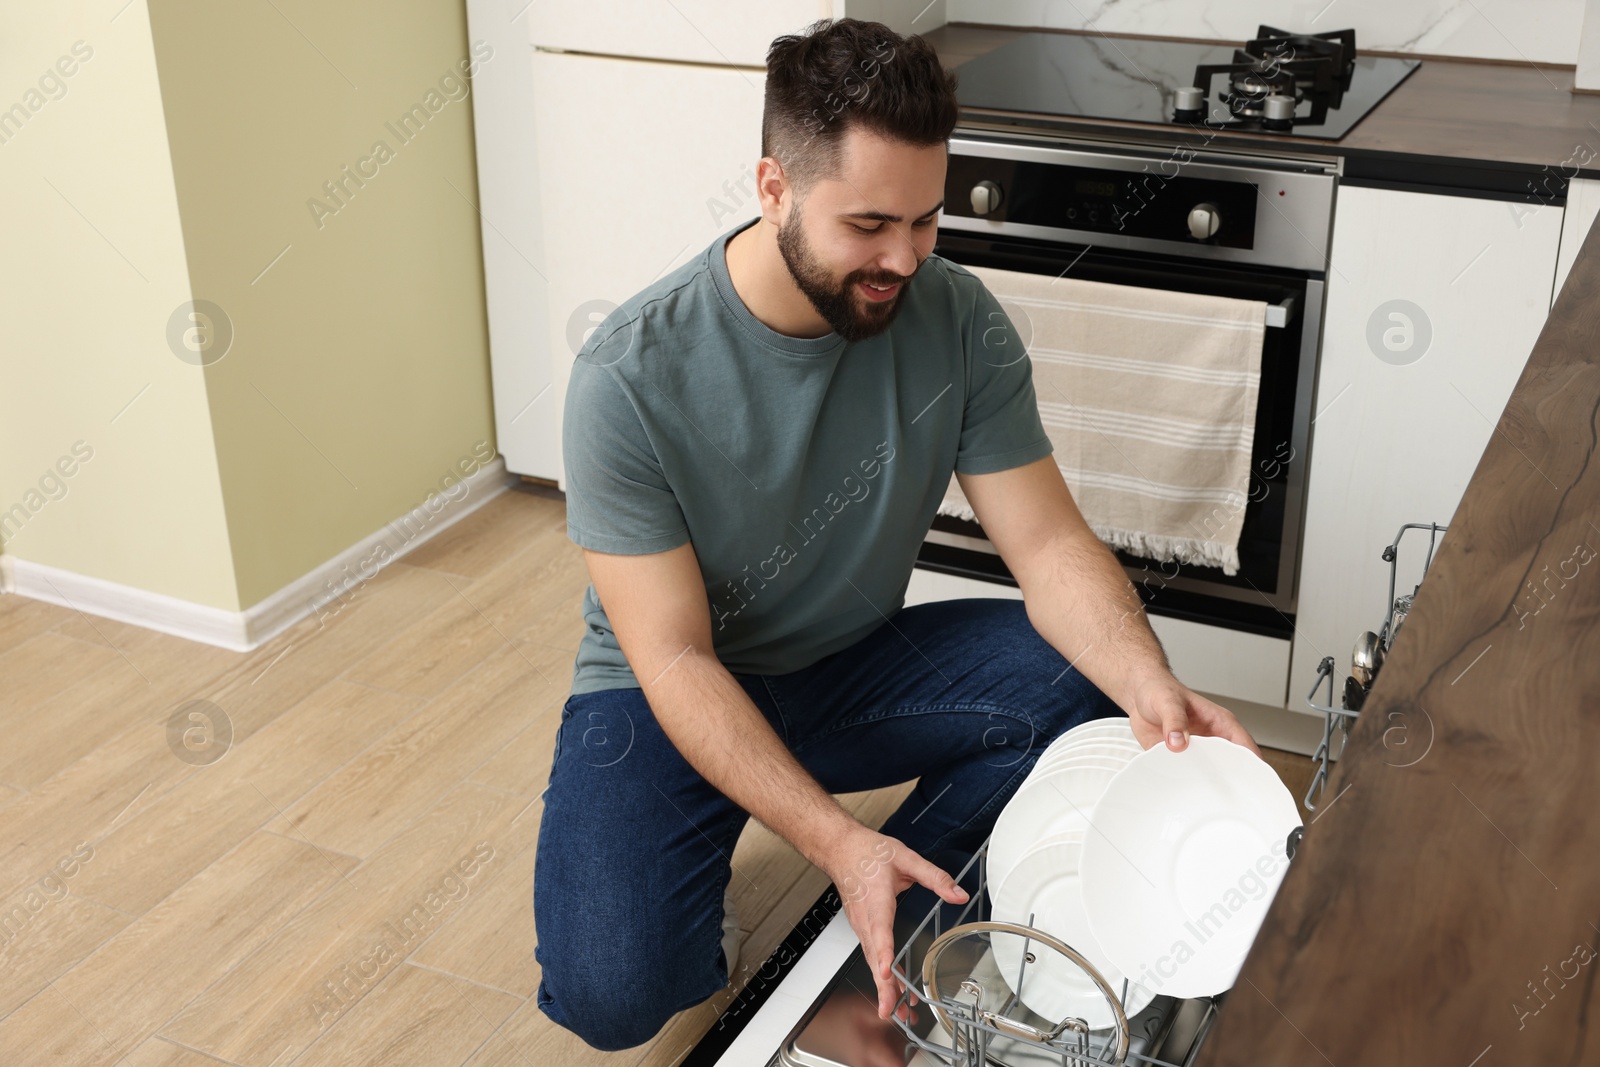 Photo of Smiling man loading dishwasher with plates in kitchen. Space for text